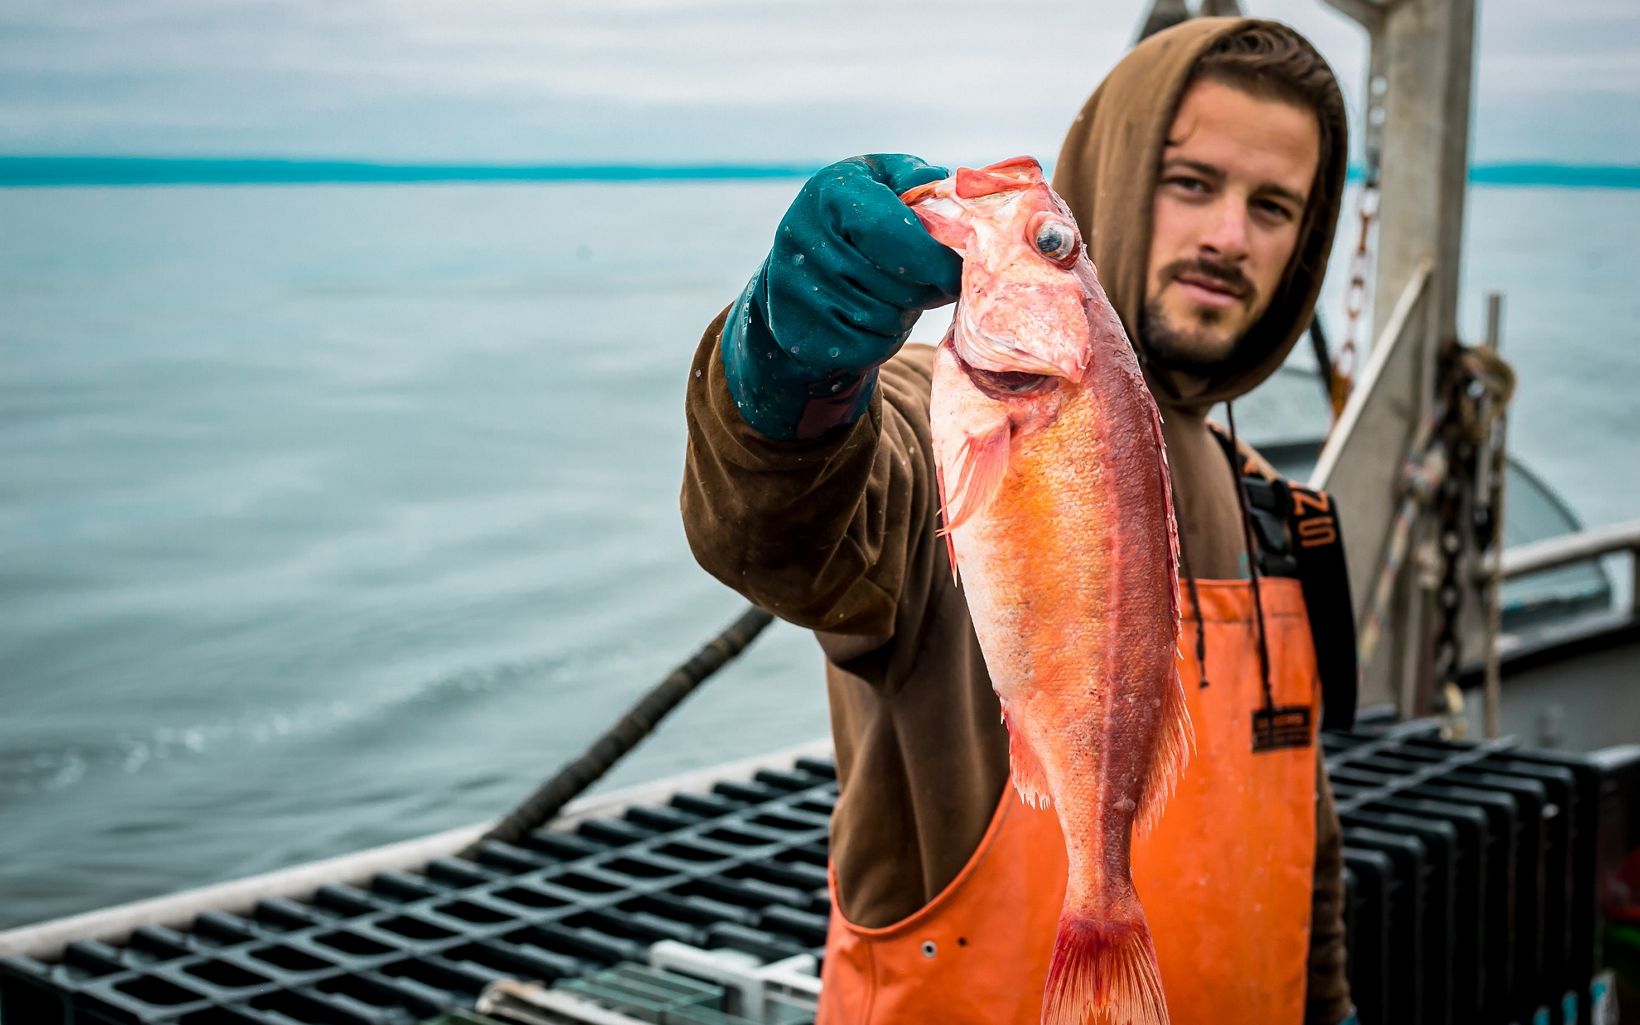 California Fisheries Local Fisherman holding a rockfish off California coast. © Ethan Righter